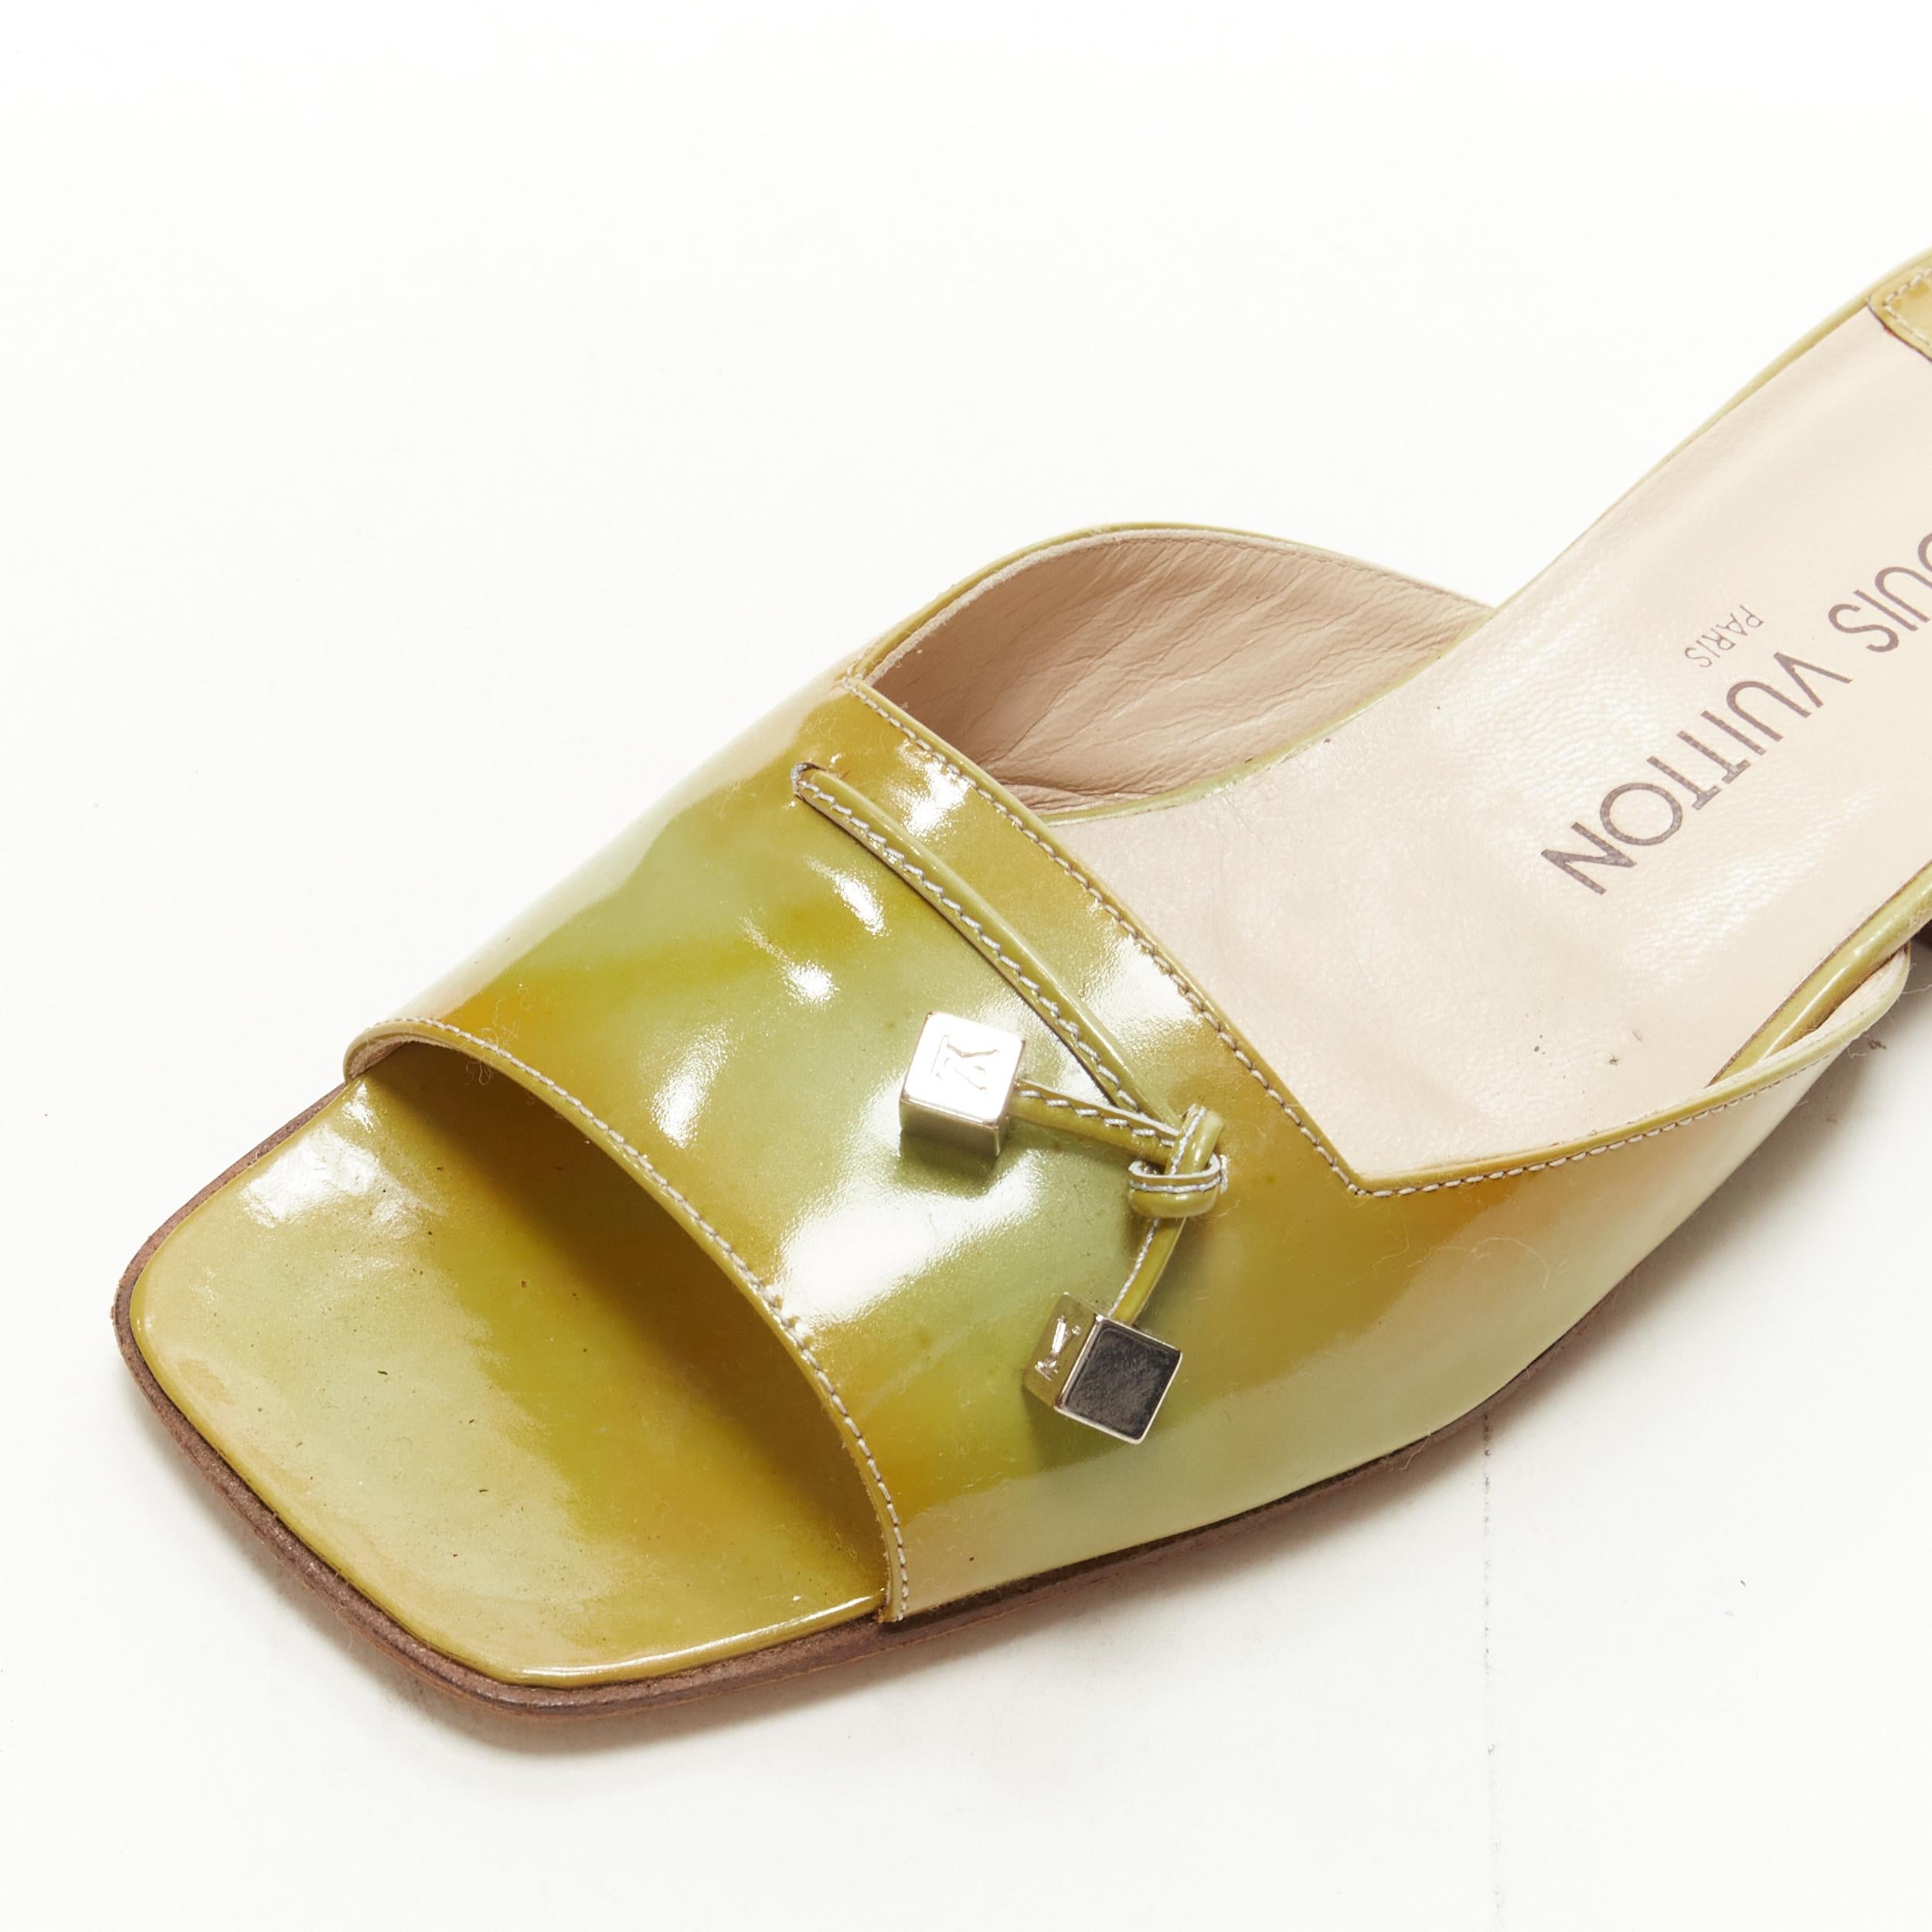 LOUIS VUITTON green yellow polished leather LV dice square toe slipper EU37
Brand: Louis Vuitton
Material: Leather
Color: Green
Pattern: Solid
Made in: Italy

CONDITION:
Condition: Fair, this item was pre-owned and is in fair condition. Please refer